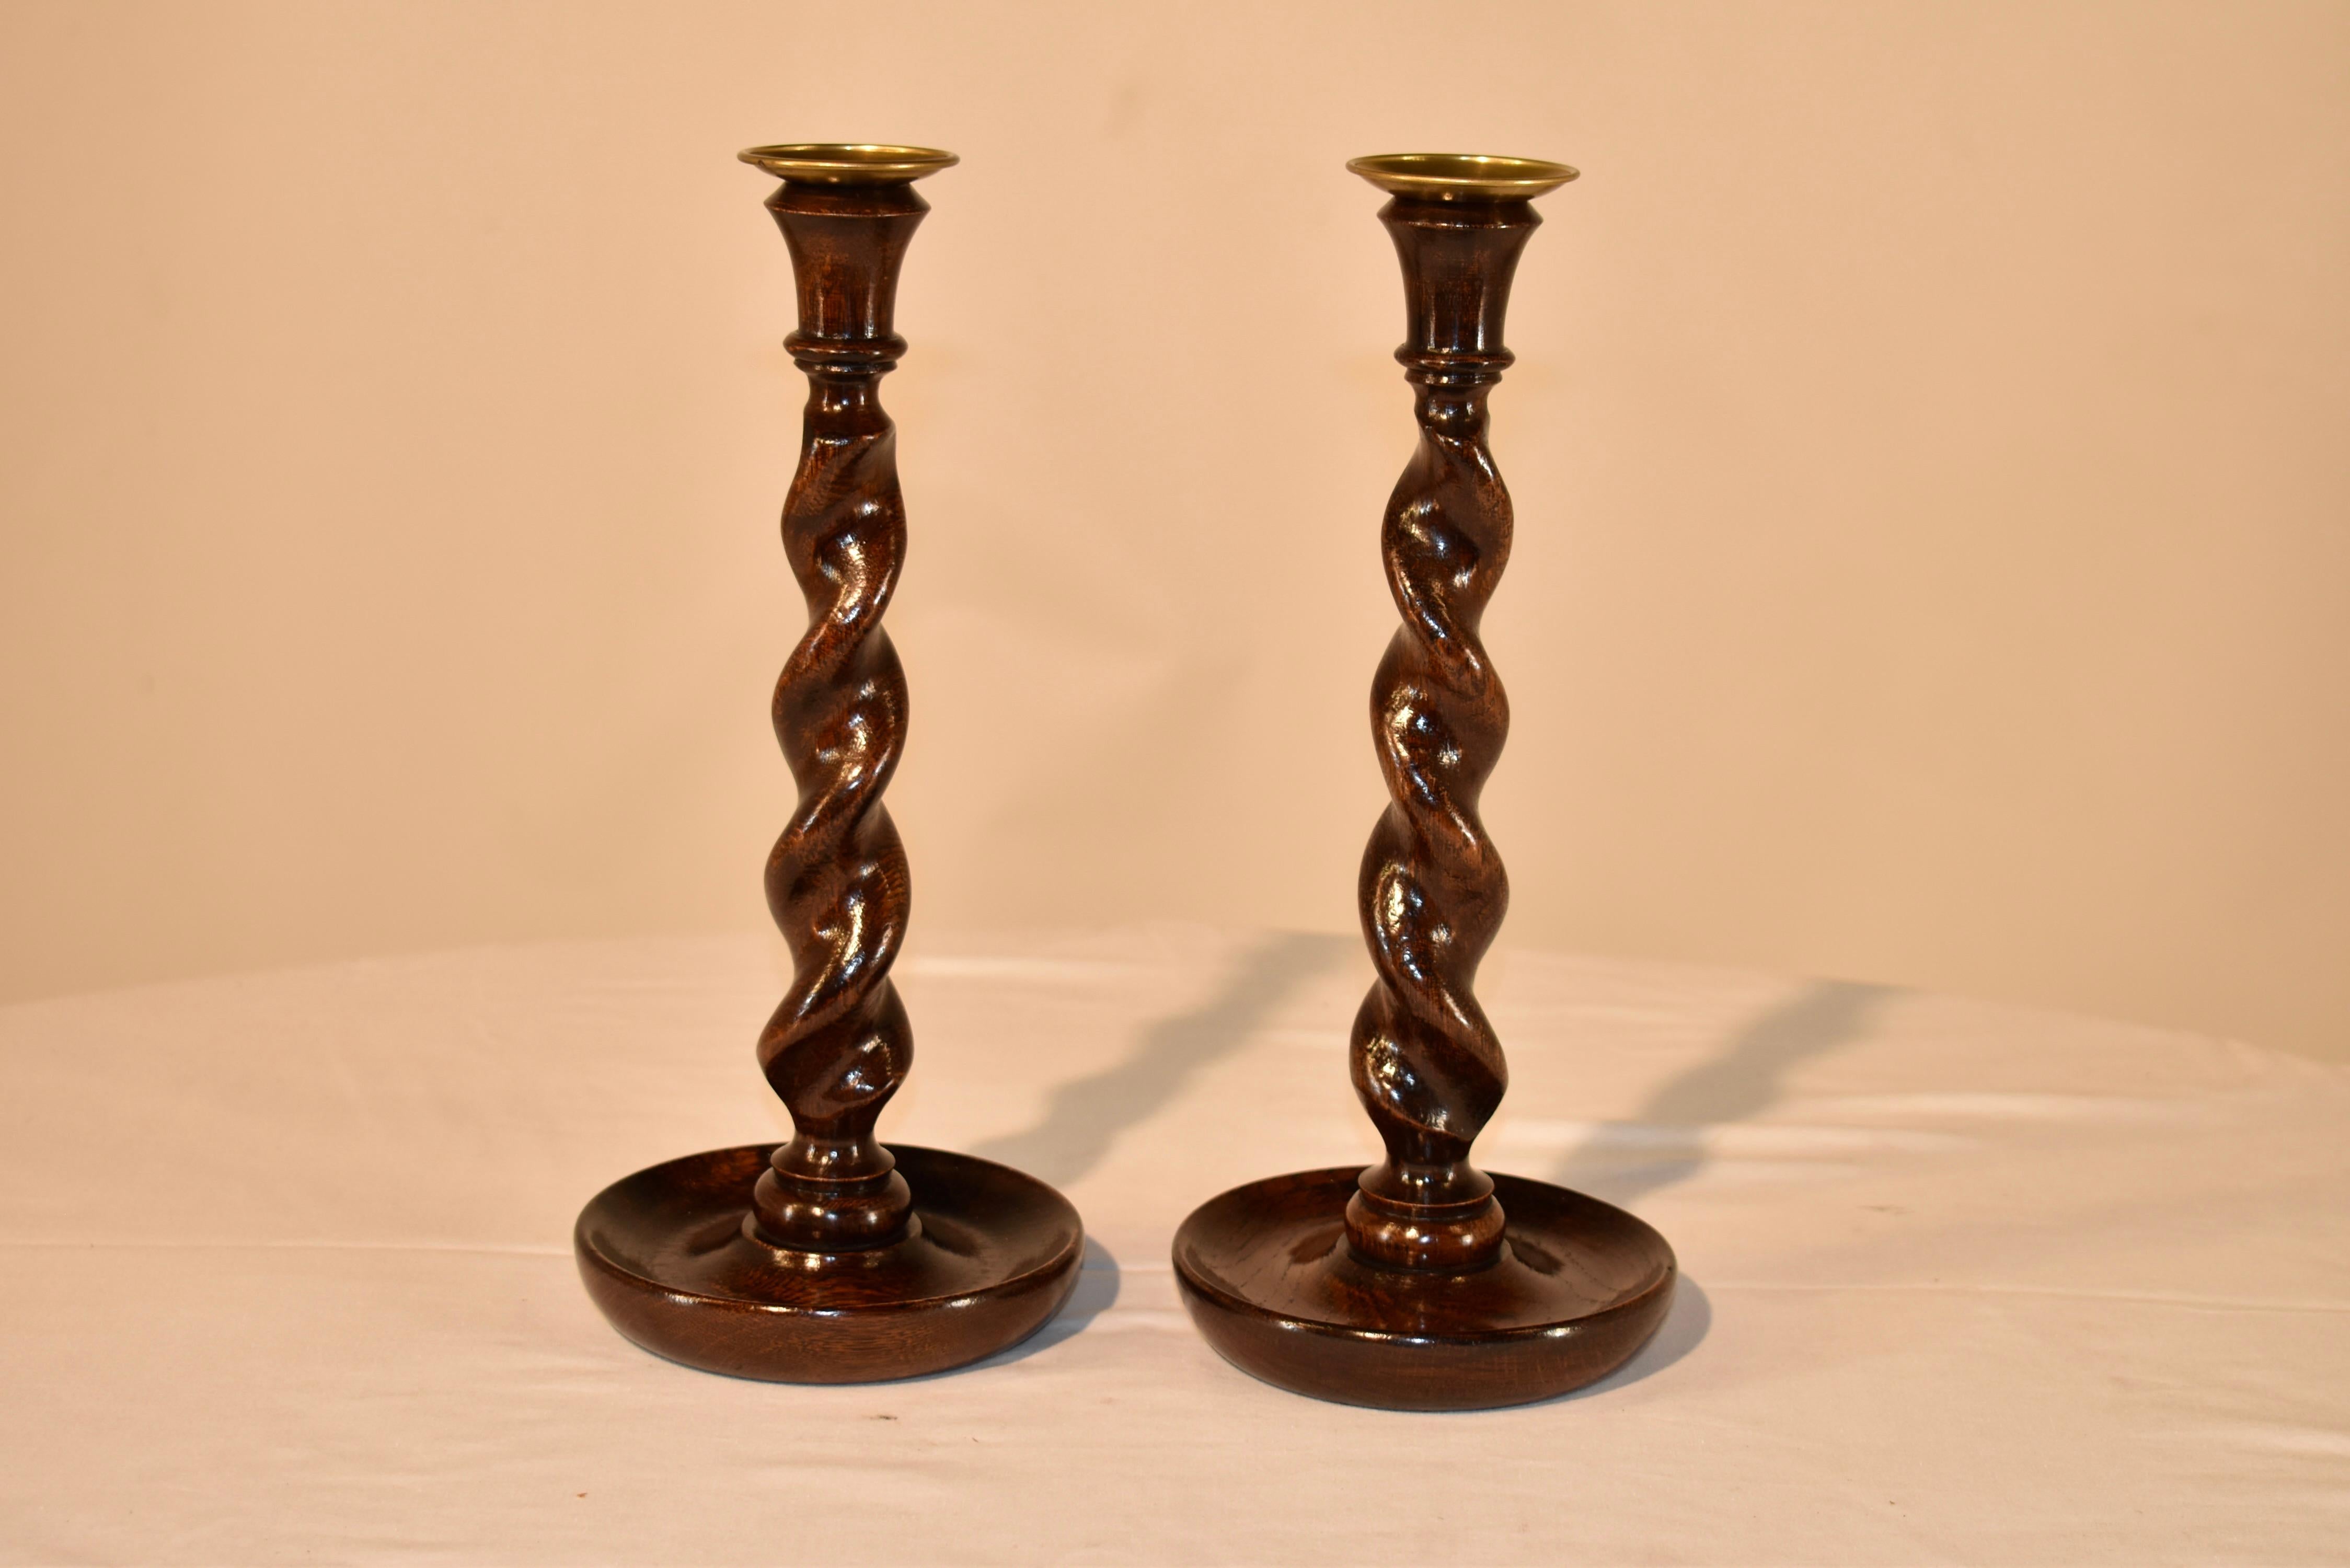 Pair of late 19th century oak candlesticks from England with hand turned candle cups, supported on top of hand turned barley twist stems and resting on hand turned dish shaped bases.